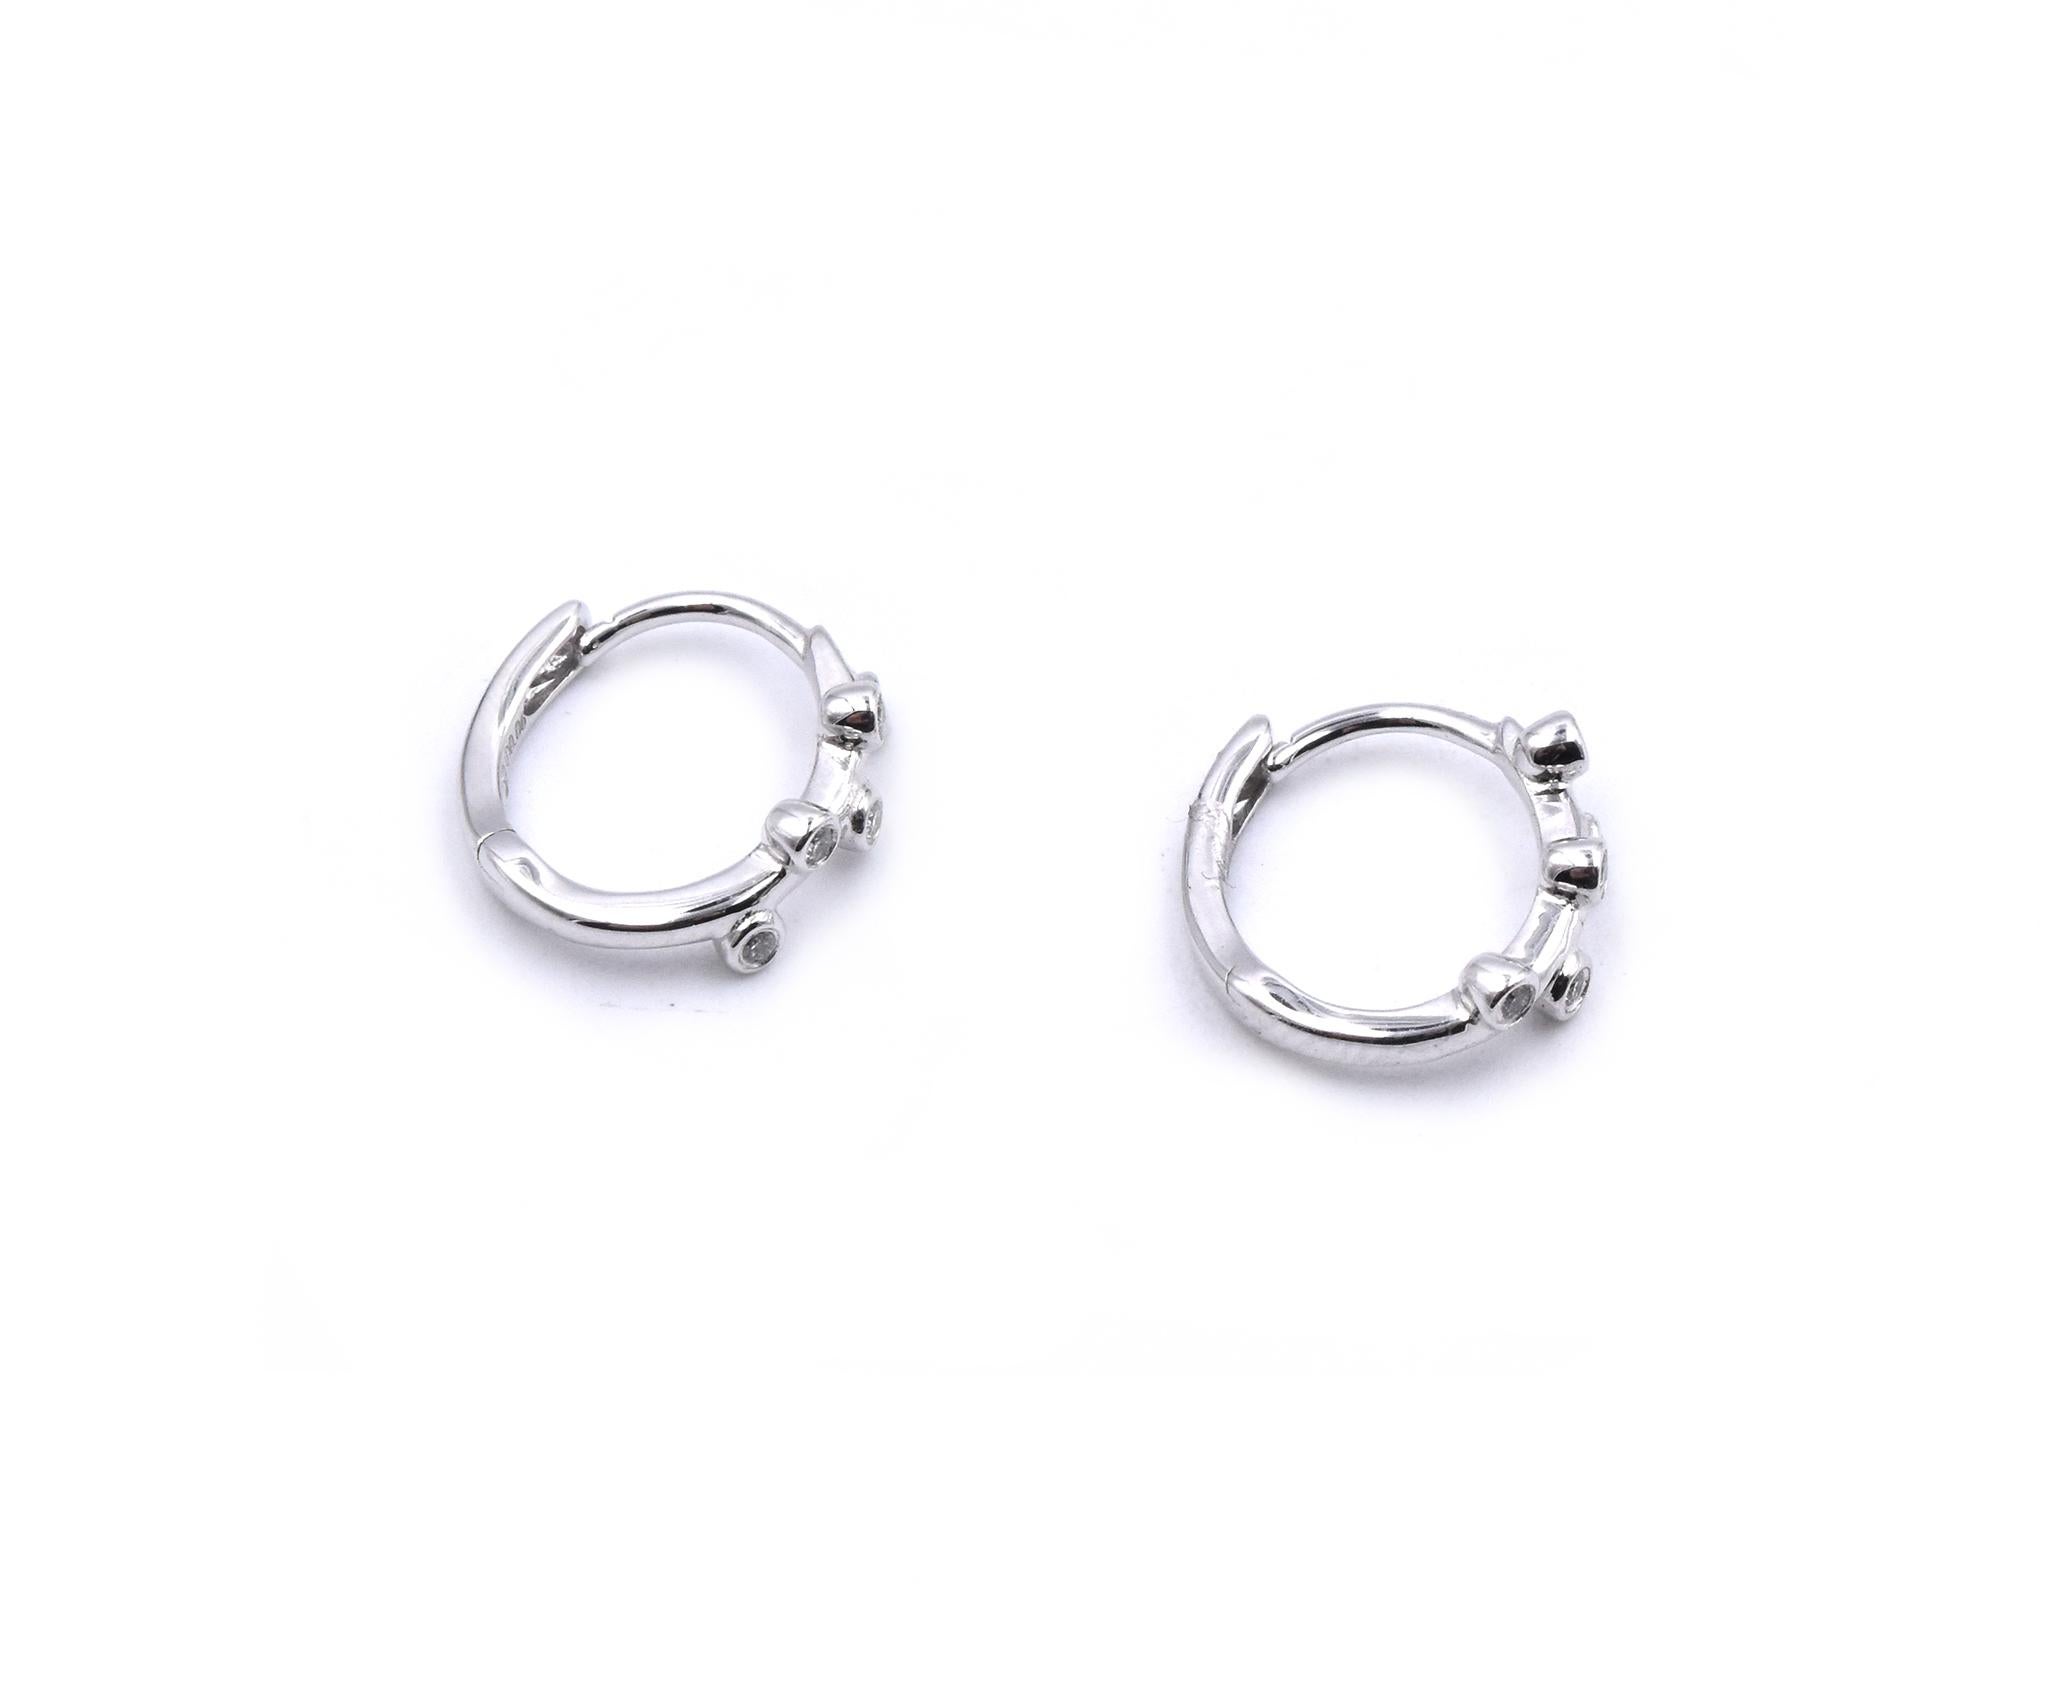 Material: 18K white gold
Diamonds: 10 round cut = .06cttw
Color: G
Clarity: VS
Dimensions: earrings measure 11.9 X 3.75mm
Fastenings: snap closure
Weight: 1.73 grams
